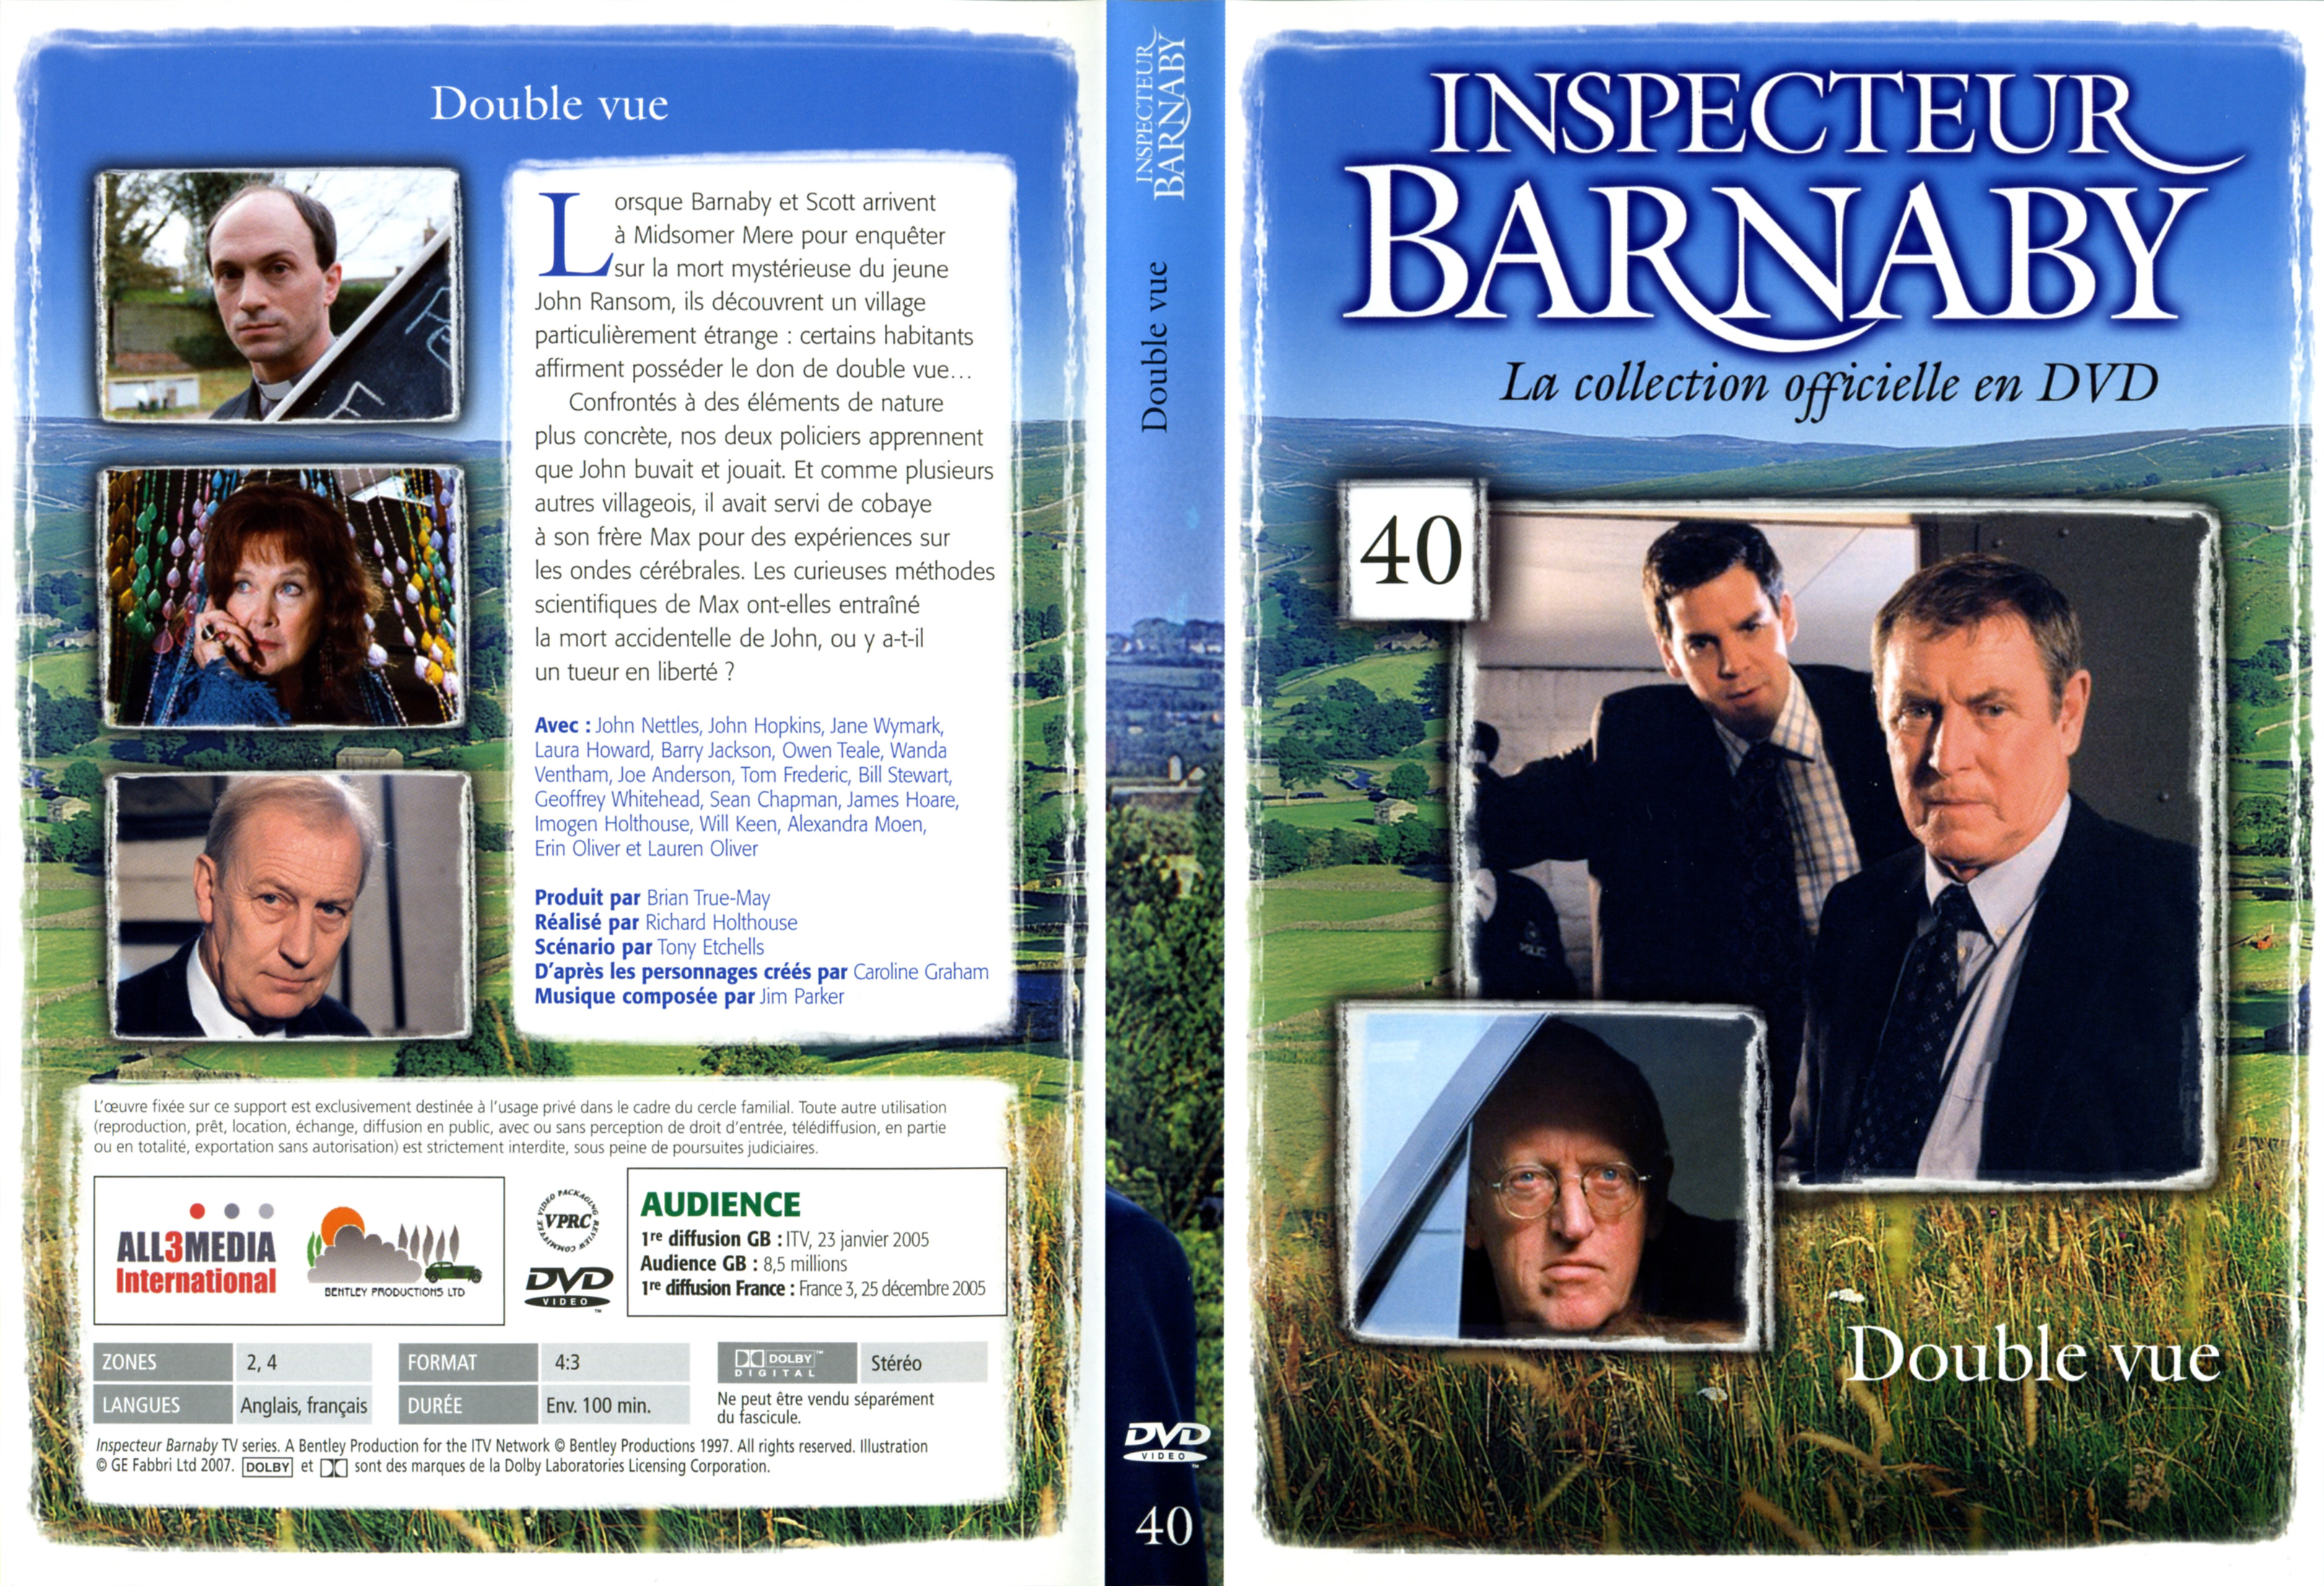 Jaquette DVD Barnaby vol 40 - Double vue